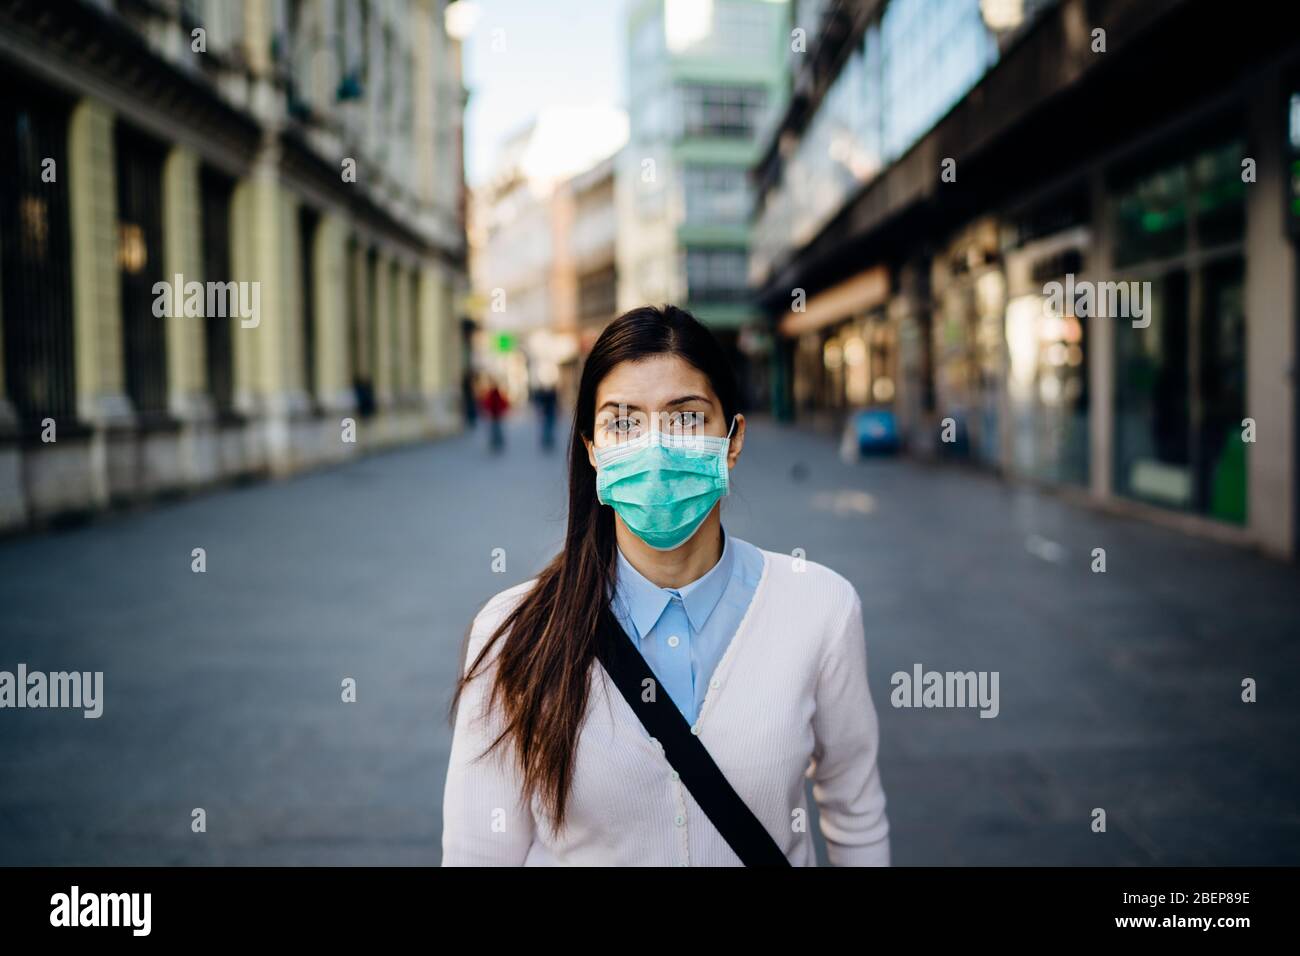 Suspicious young adult affected by the COVID-19.Walking,going to work during pandemic.Protective measures,mask wearing.Respecting guidelines.Empty str Stock Photo